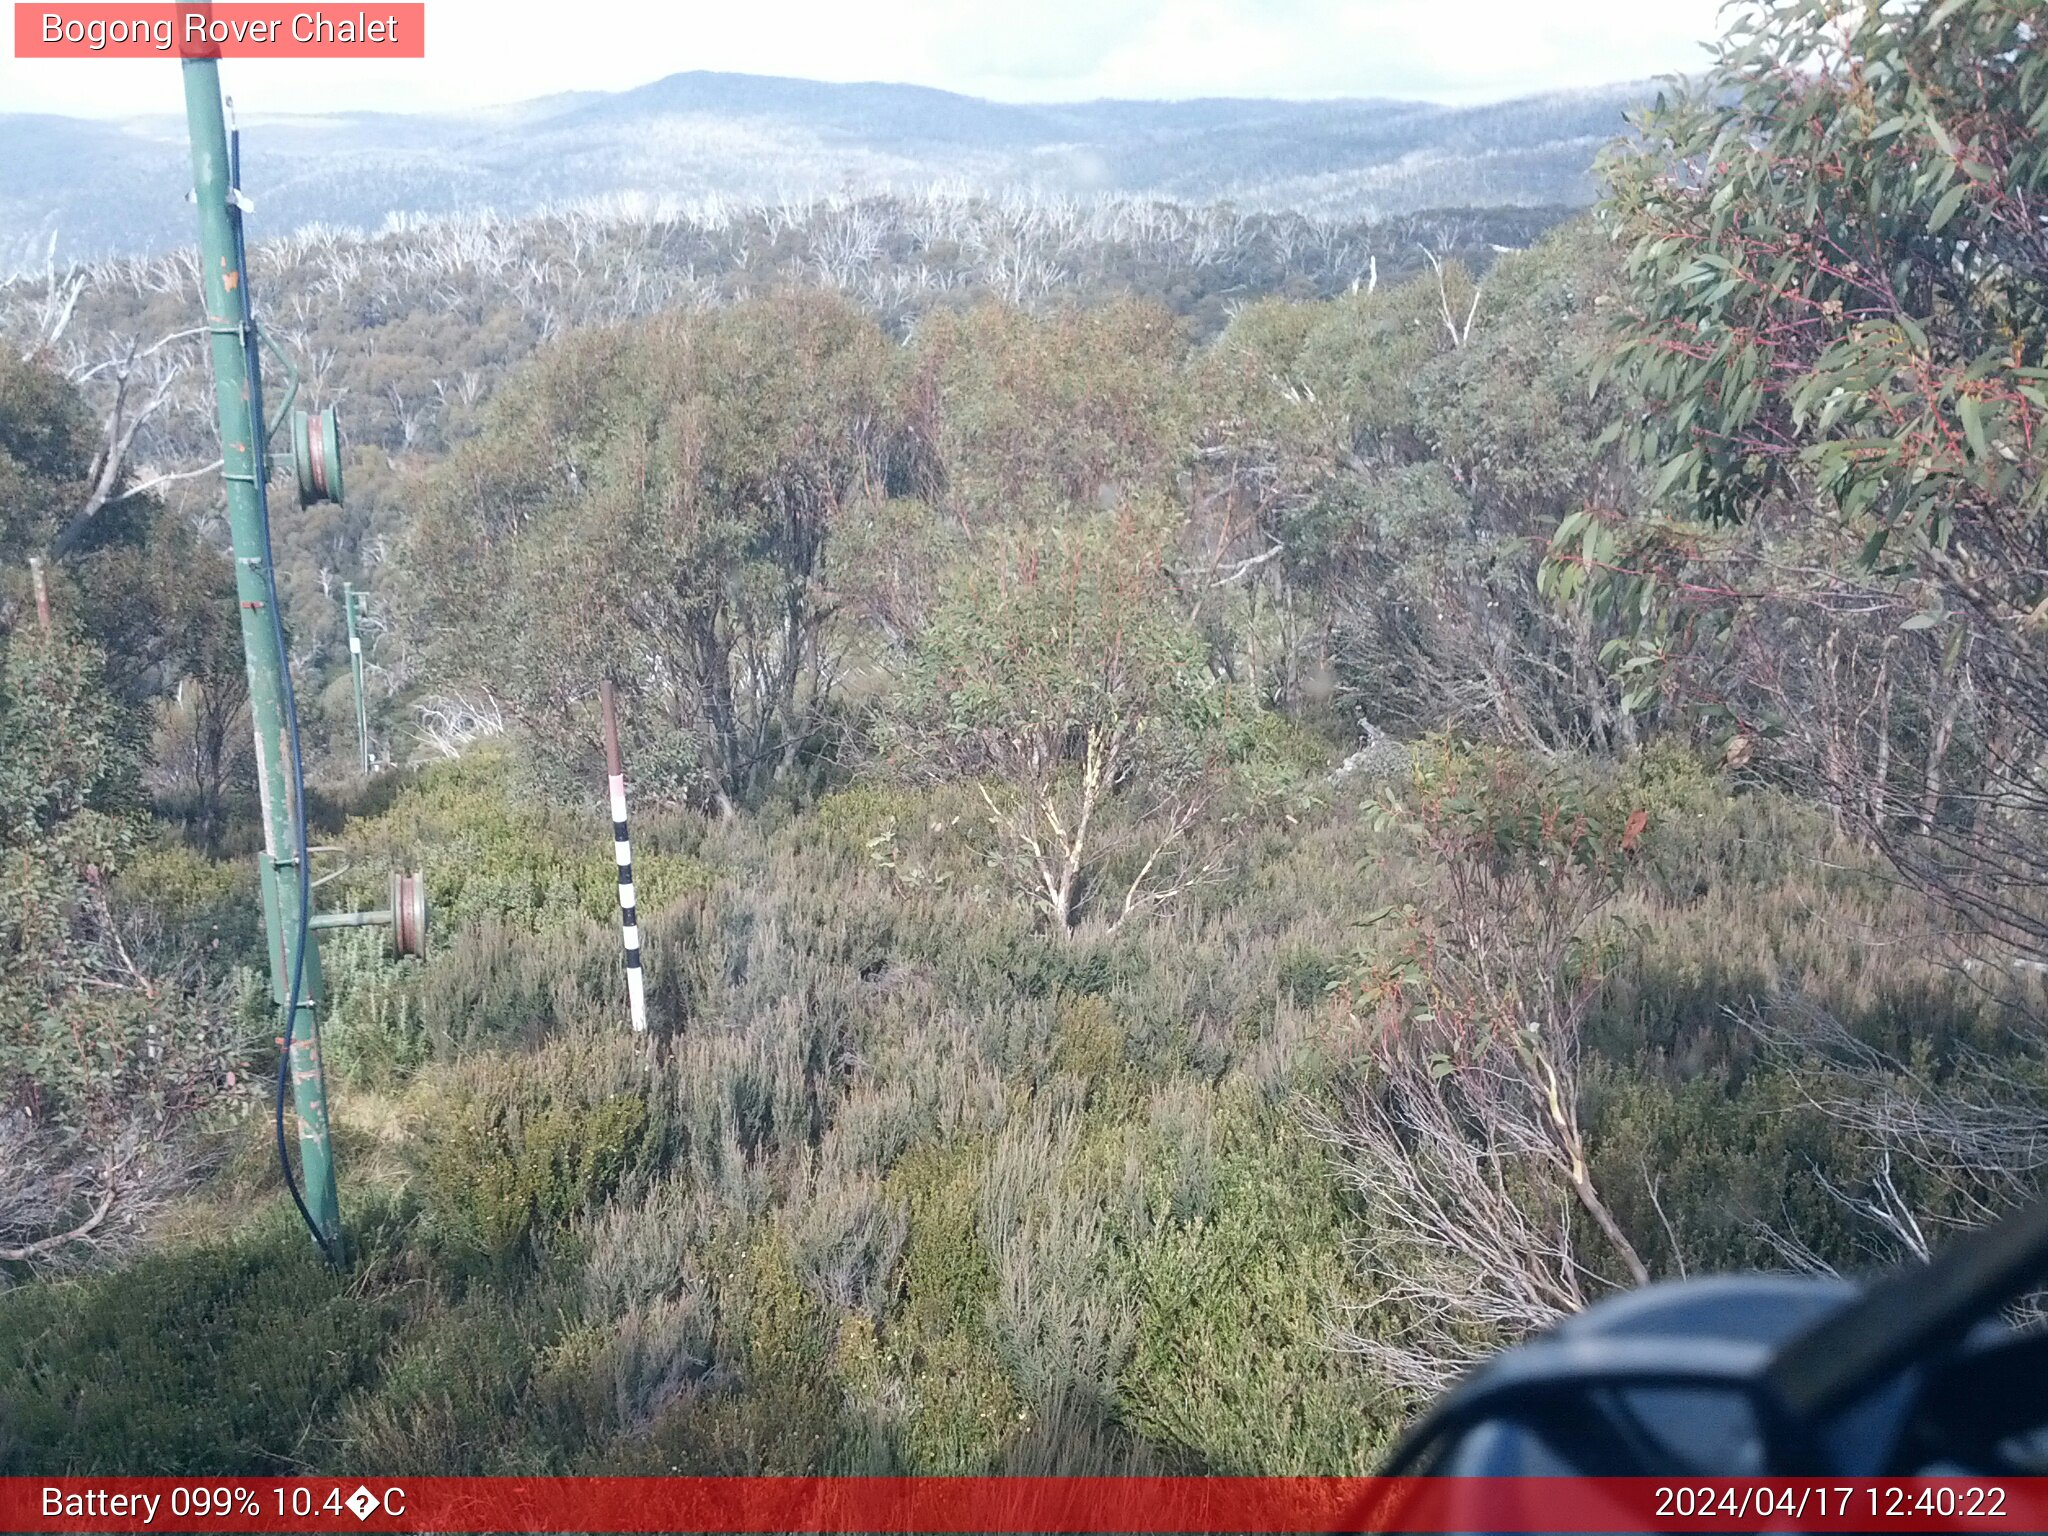 Bogong Web Cam 12:40pm Wednesday 17th of April 2024